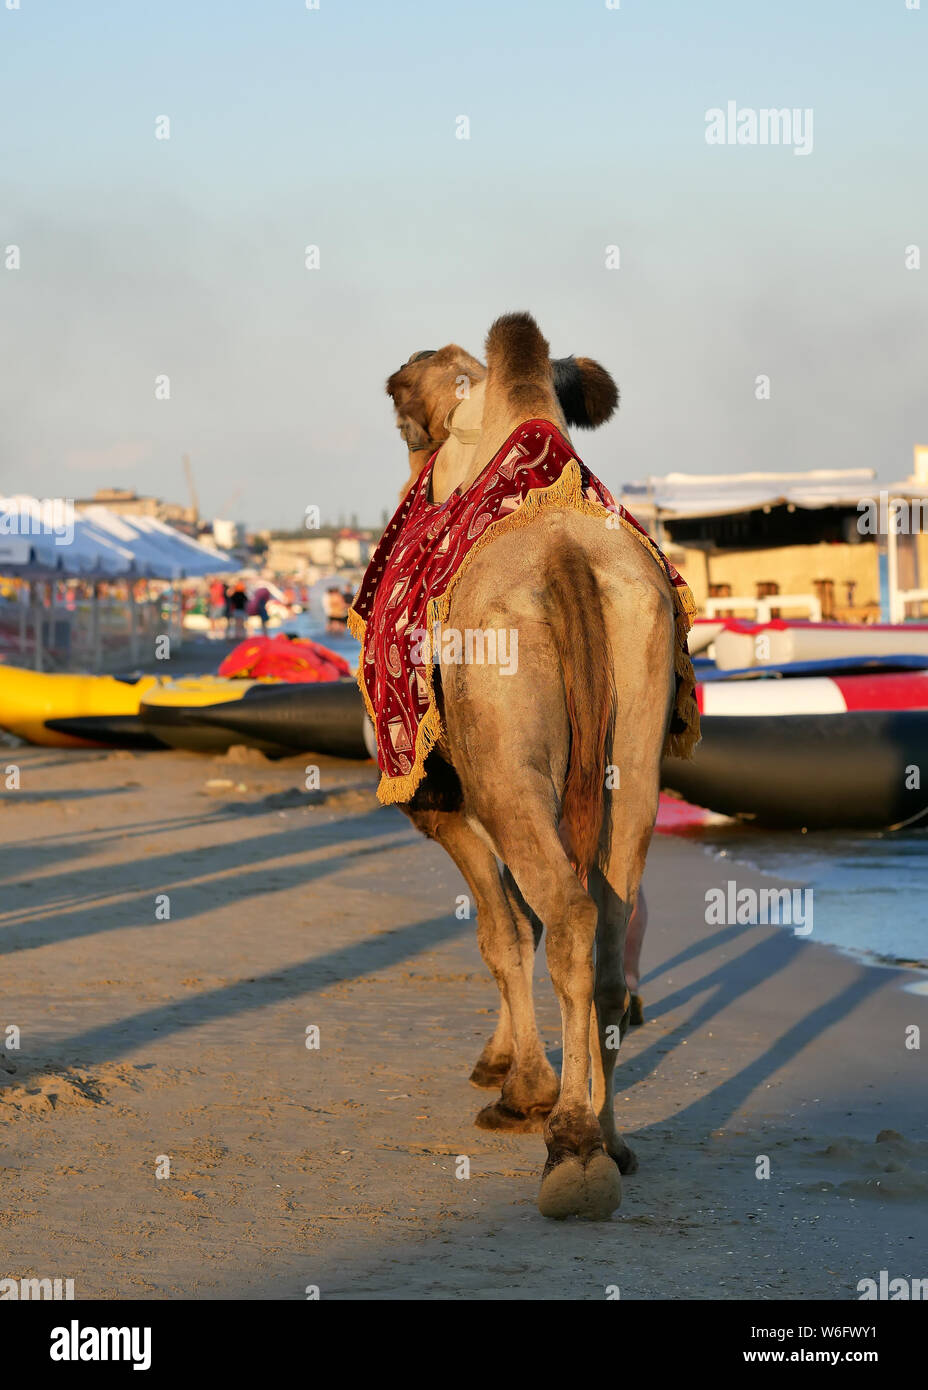 camel walking on the beach rear view Stock Photo